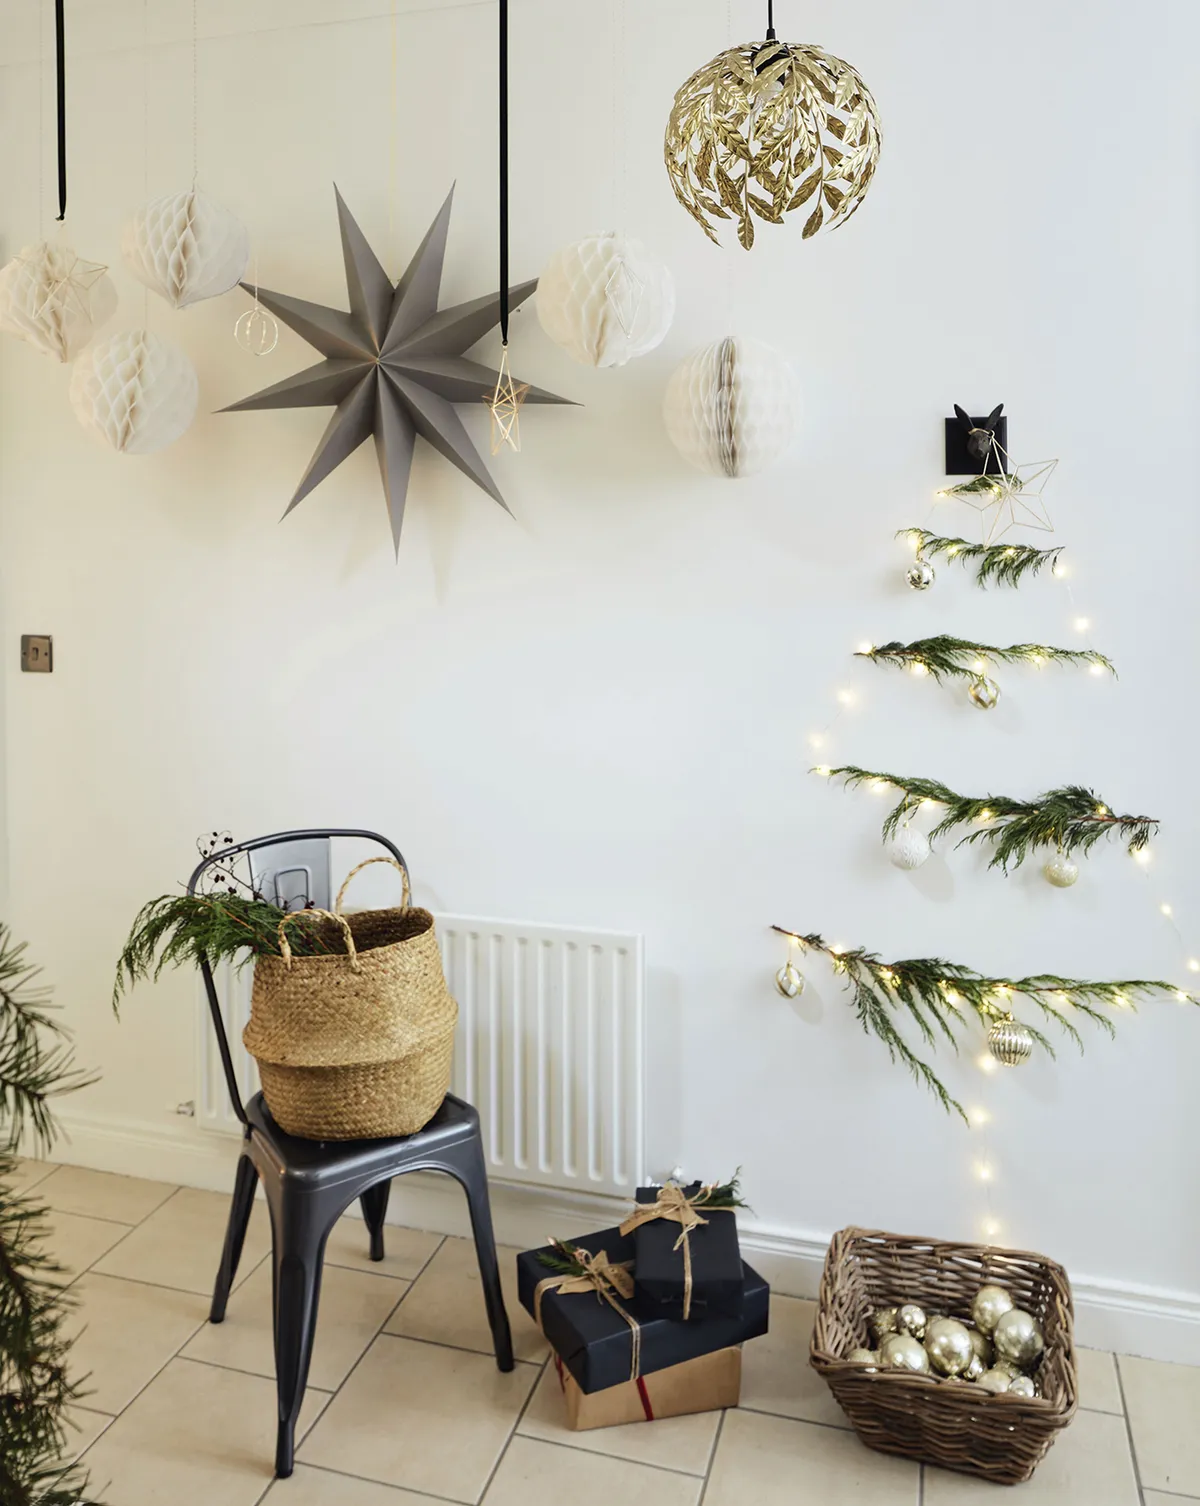 ‘I look at Pinterest and Instagram for inspiration so I can find unusual decorating ideas for Christmas,’ says Ediana. ‘The large stars from IKEA are my staple decorations at this time of year and work well with my paper balls from Sostrene Grene’